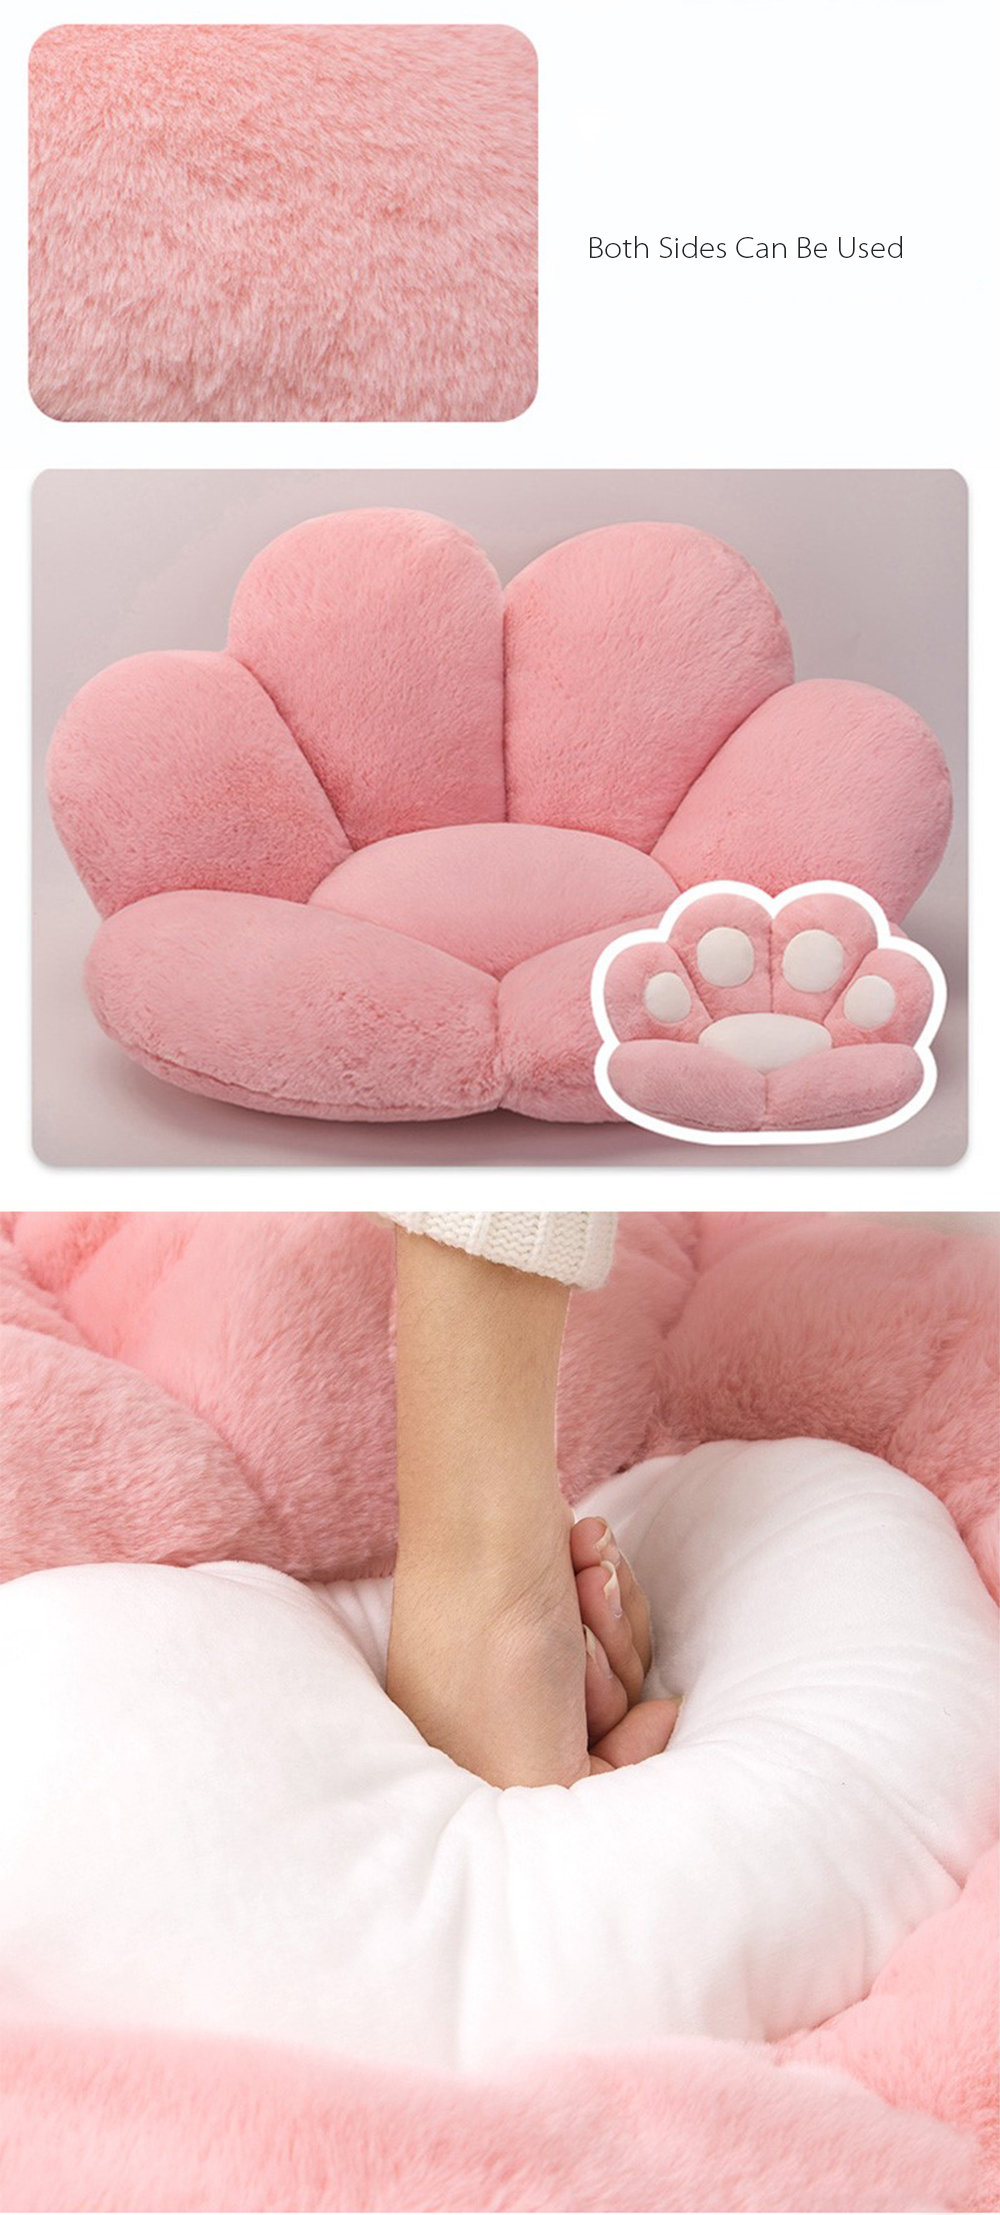 Cat Paw Inspired Cushion - Plush - White - Pink - 3 Colors - 2